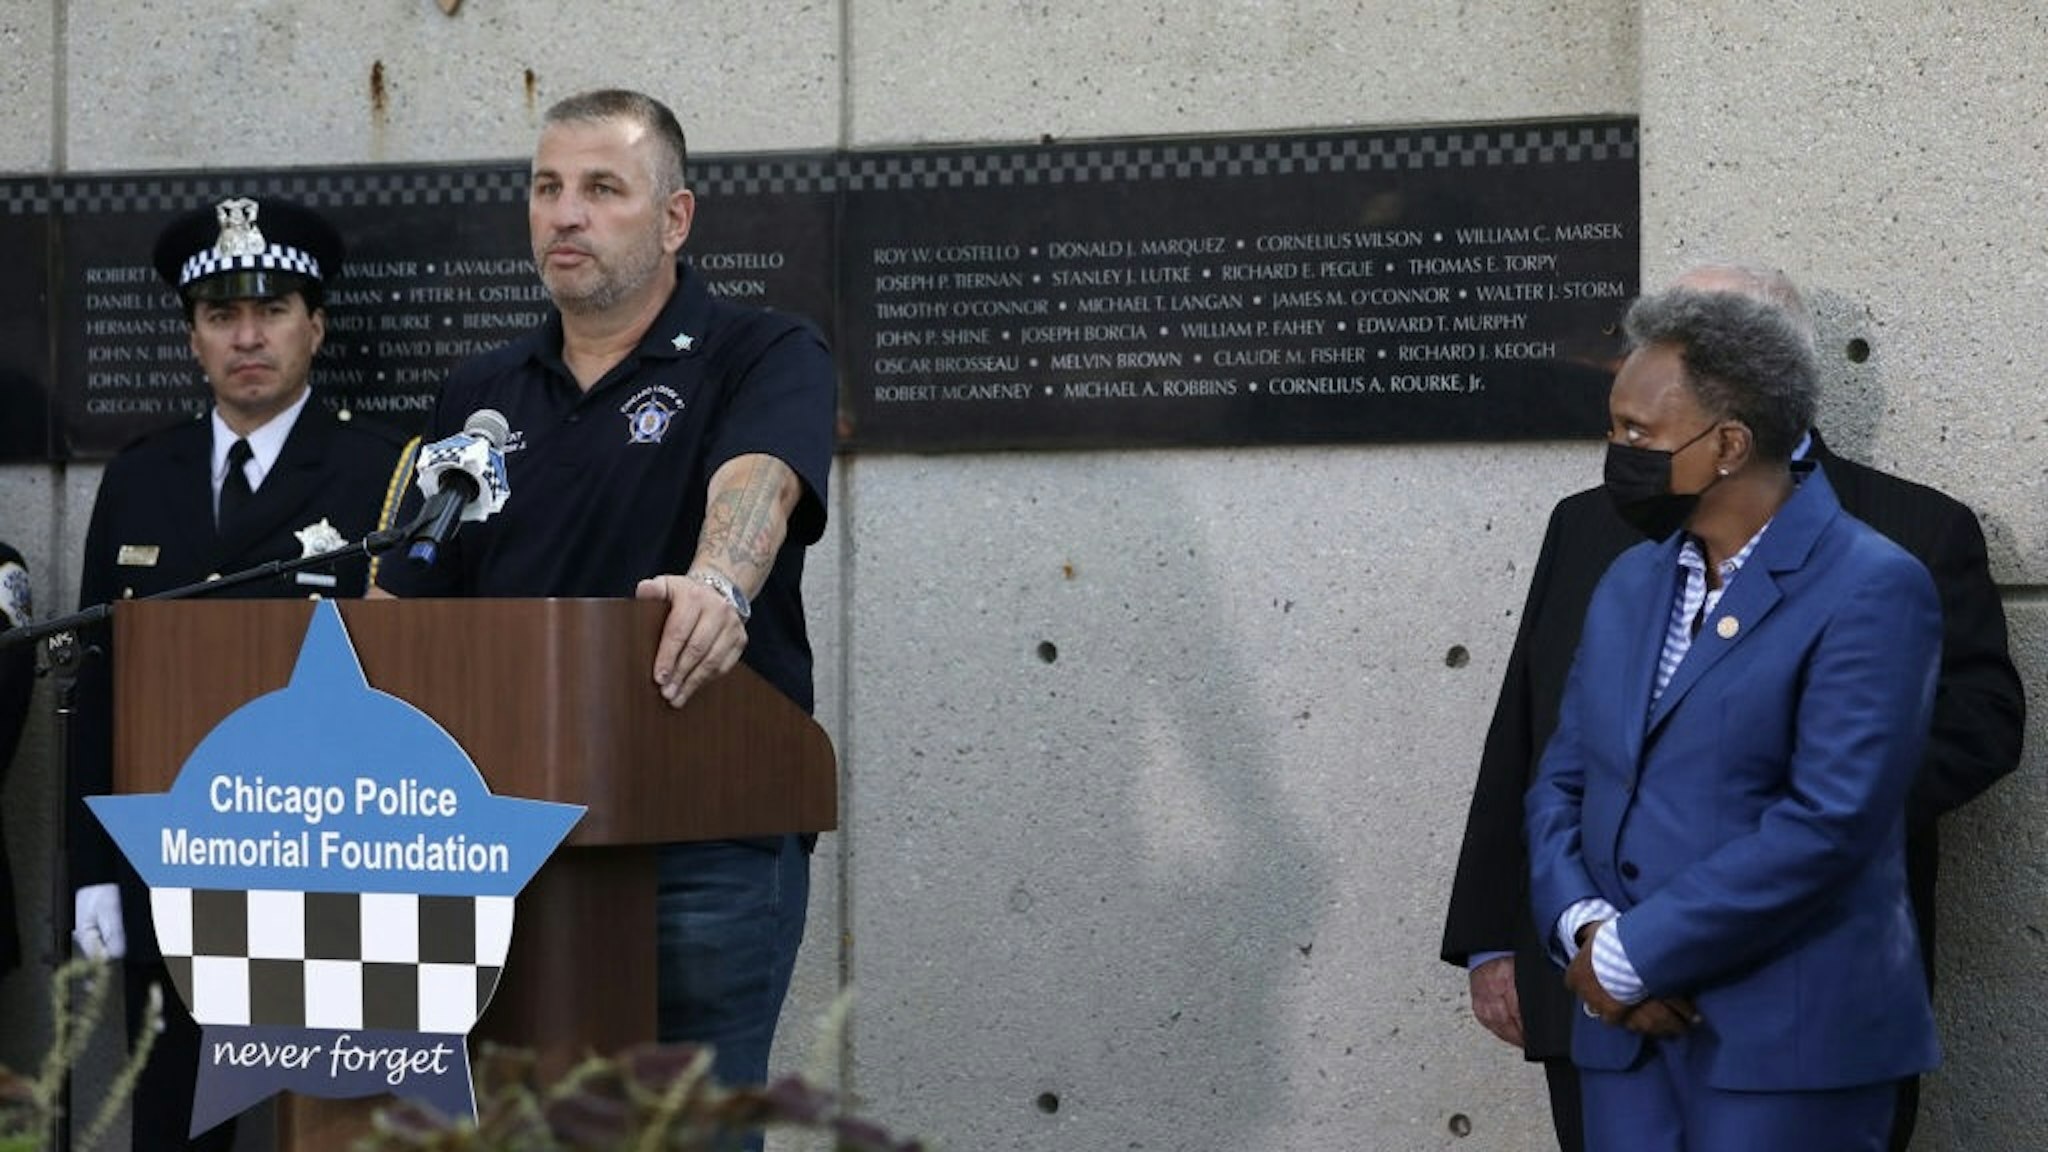 US-NEWS-CORONAVIRUS-CHICAGO-POLICE-TB John Catanzara, president of the Chicago Fraternal Order of Police Lodge 7, addresses attendees as Mayor Lori Lightfoot watches during the unveiling of names for five Chicago police officers at the Gold Star Families Memorial and Park in September. Four of the officers died of COVID-19 symptoms in 2020, and Officer Ella French was fatally shot on Aug. 7, during a traffic stop while on patrol. (John J. Kim/Chicago Tribune/Tribune News Service via Getty Images) Chicago Tribune / Contributor